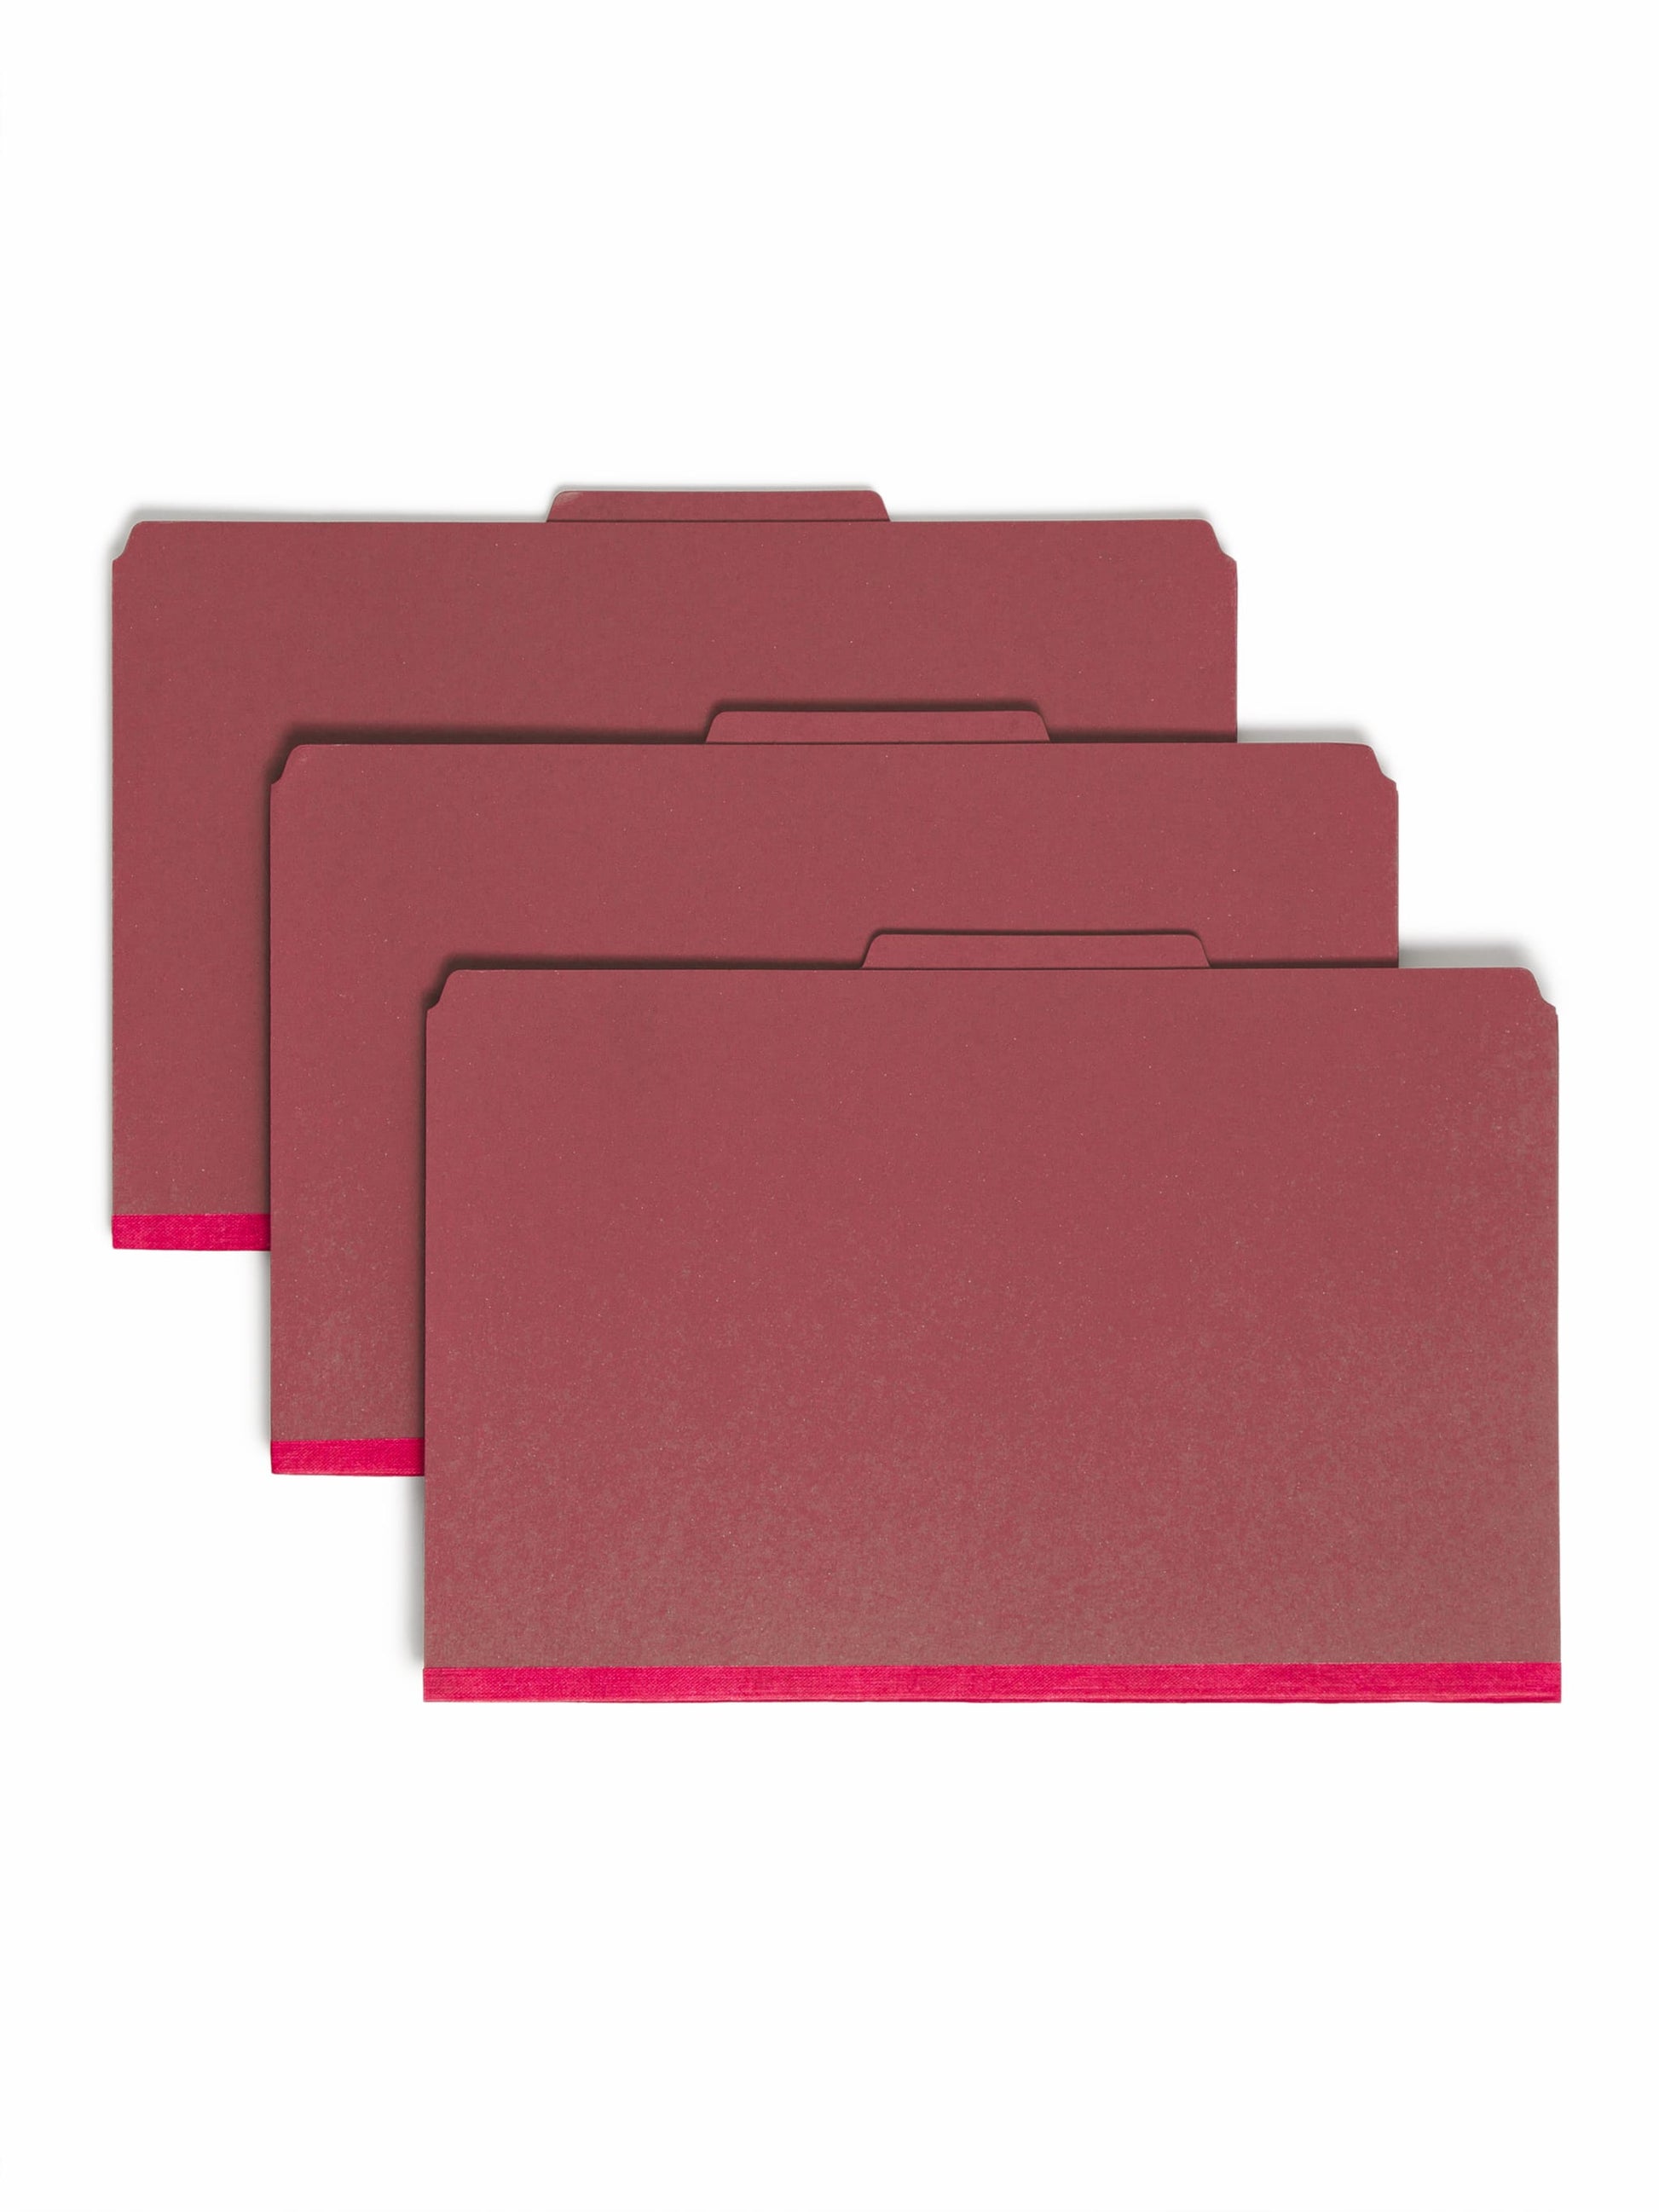 SafeSHIELD® Pressboard Classification File Folders with Pocket Dividers, Bright Red Color, Legal Size, Set of 0, 30086486190825